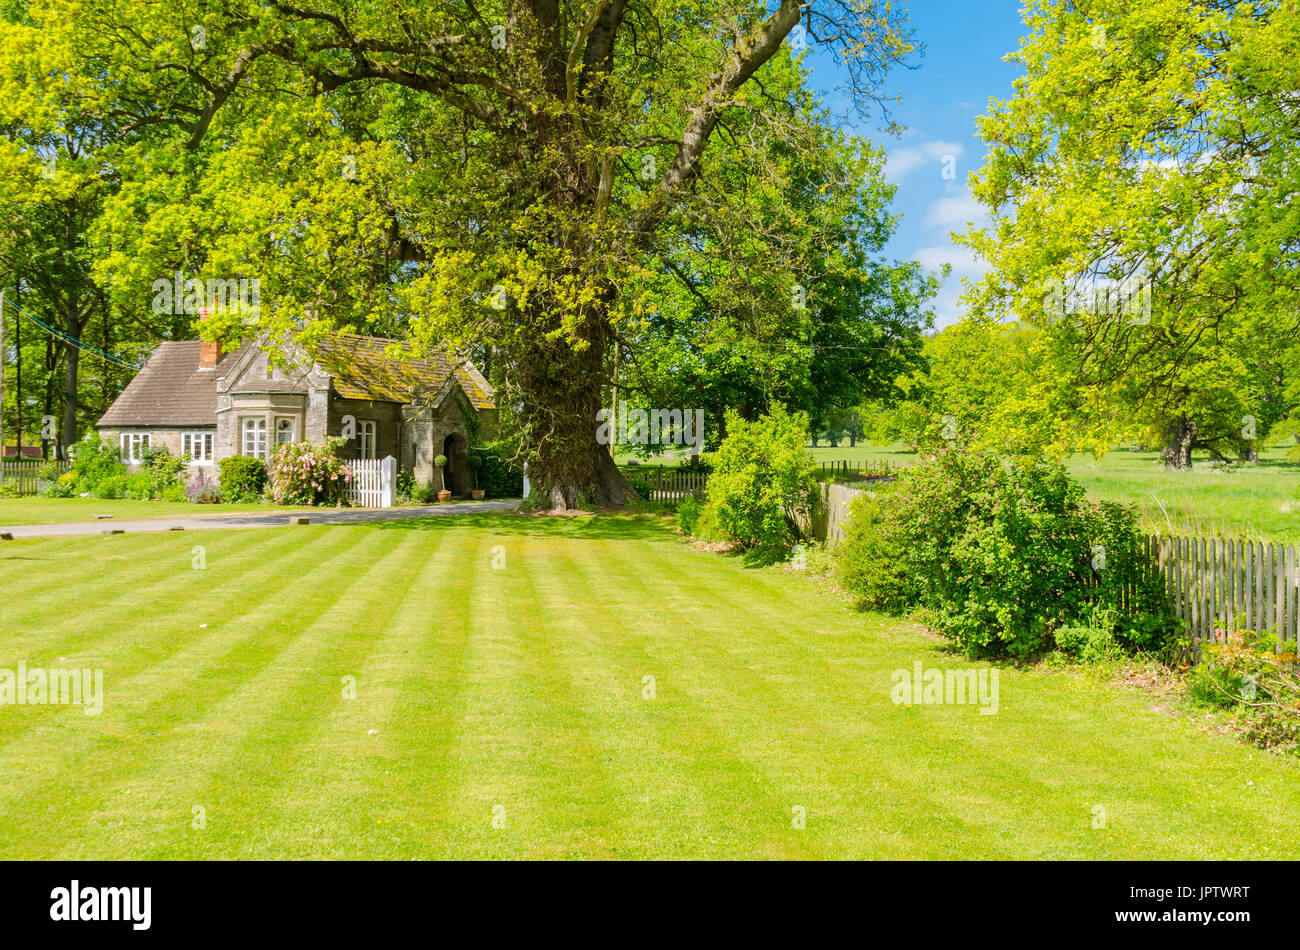 An idyllic spot in the Herefordshire countryside England Stock Photo